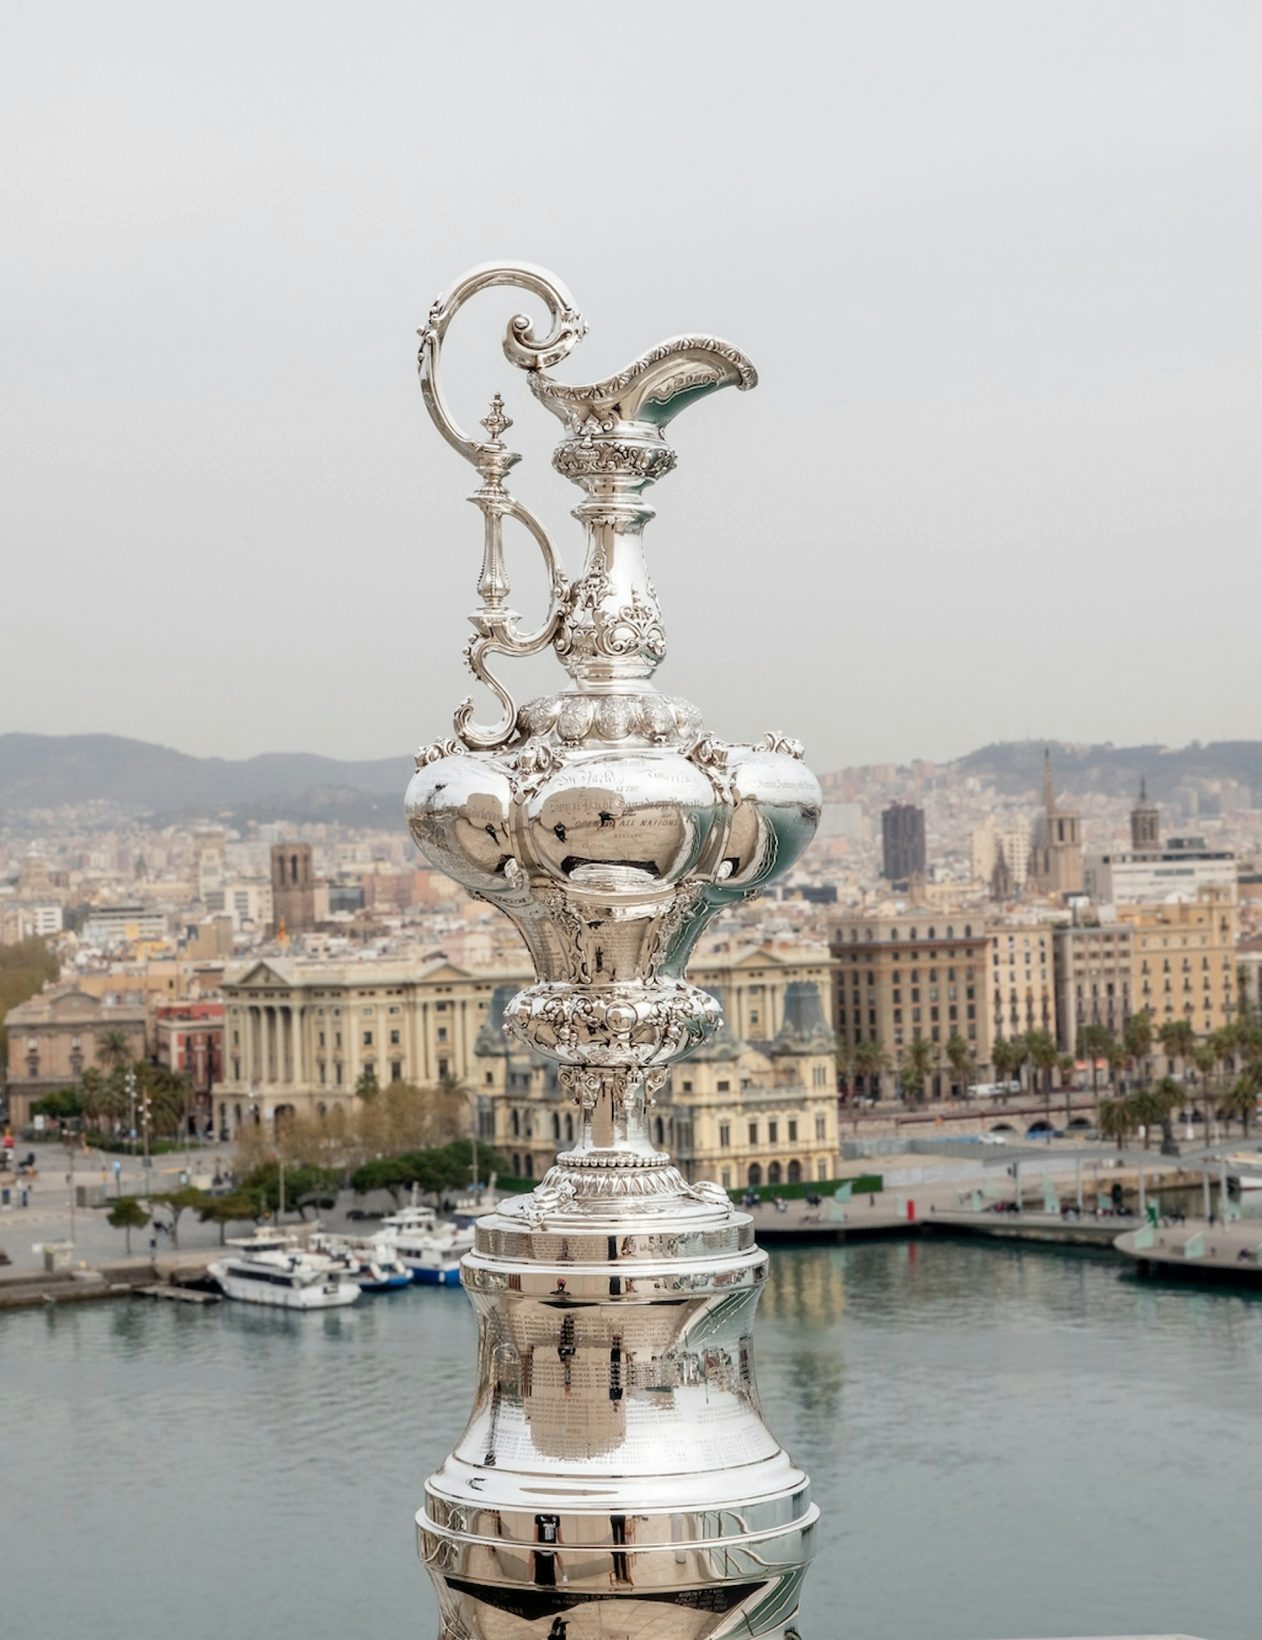 L’Oréal partners with the women’s edition of the 37th America’s Cup